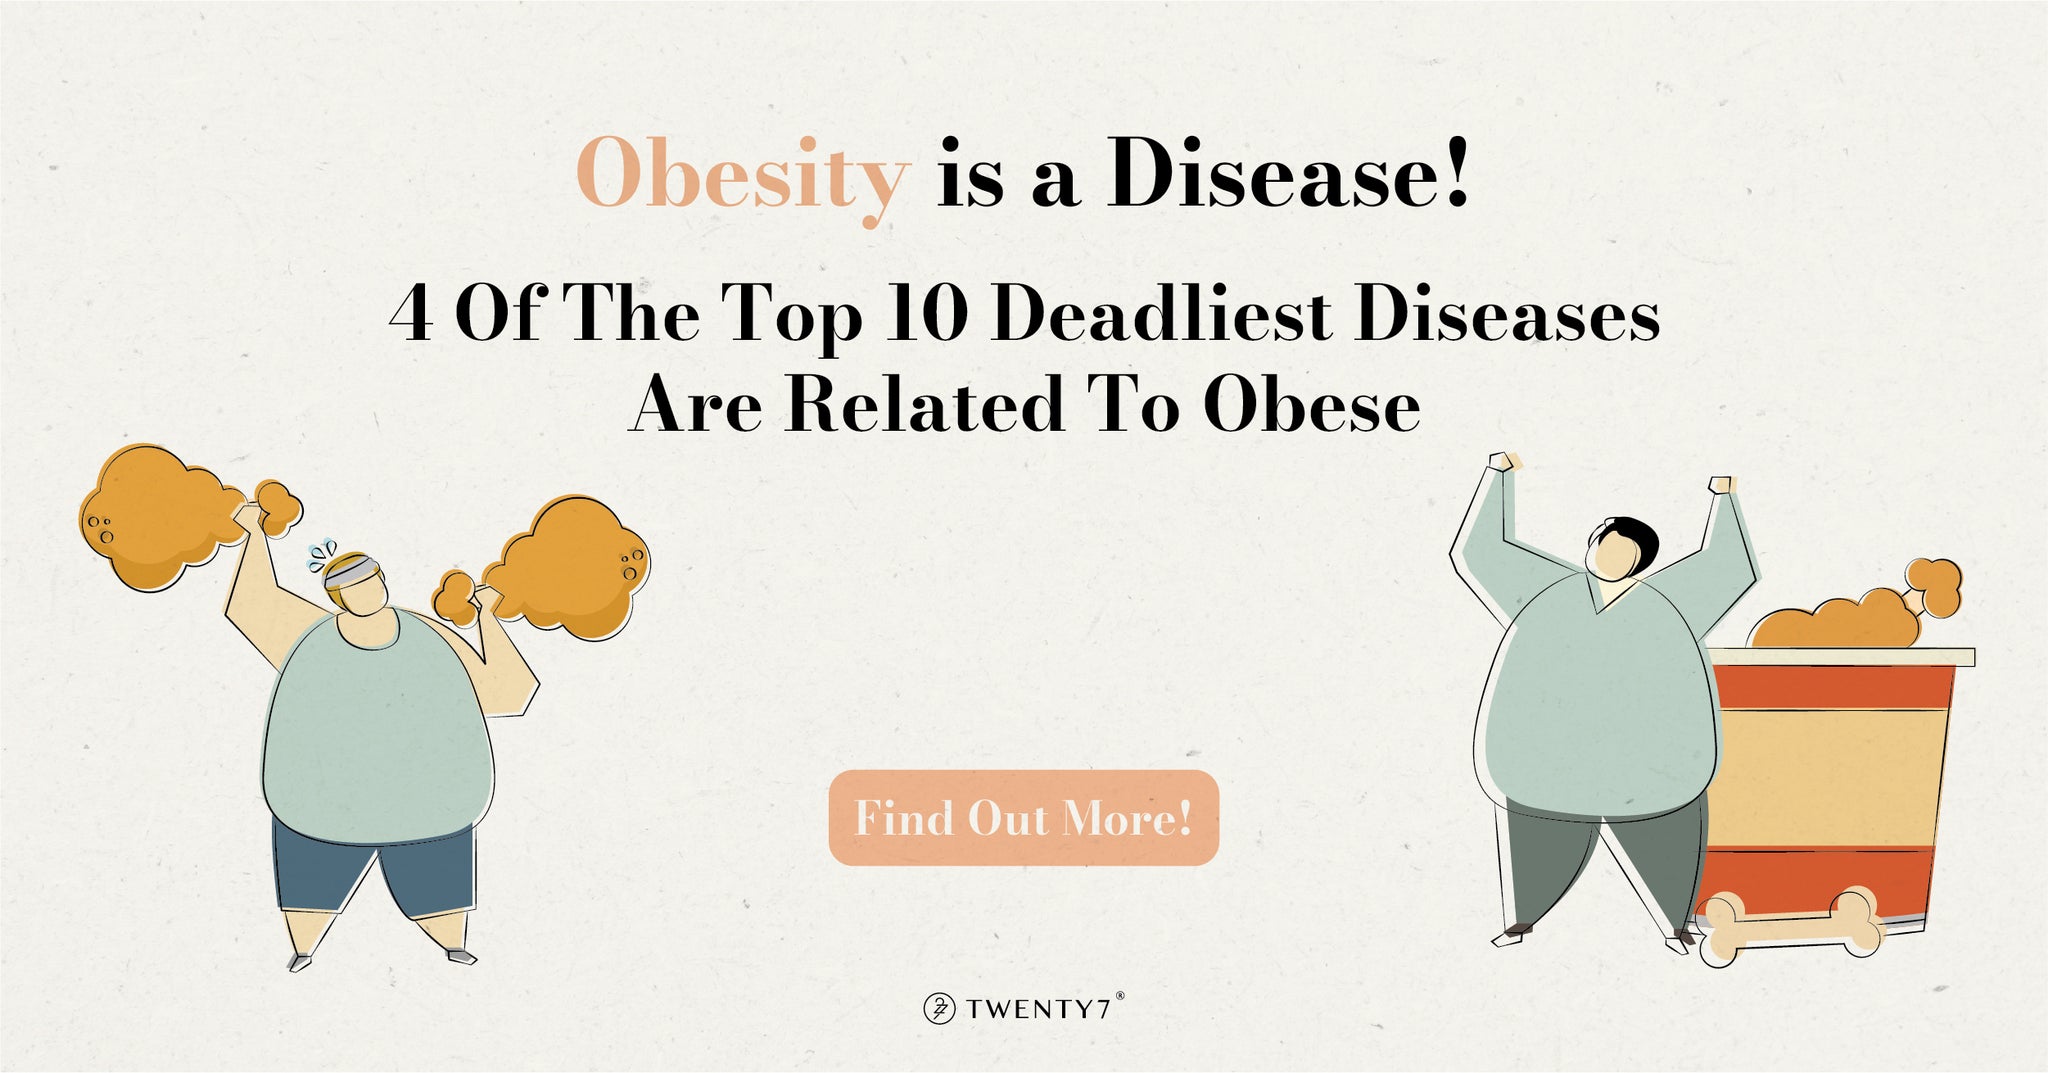 4 Of The Top 10 Deadliest Diseases Are Related To Obese